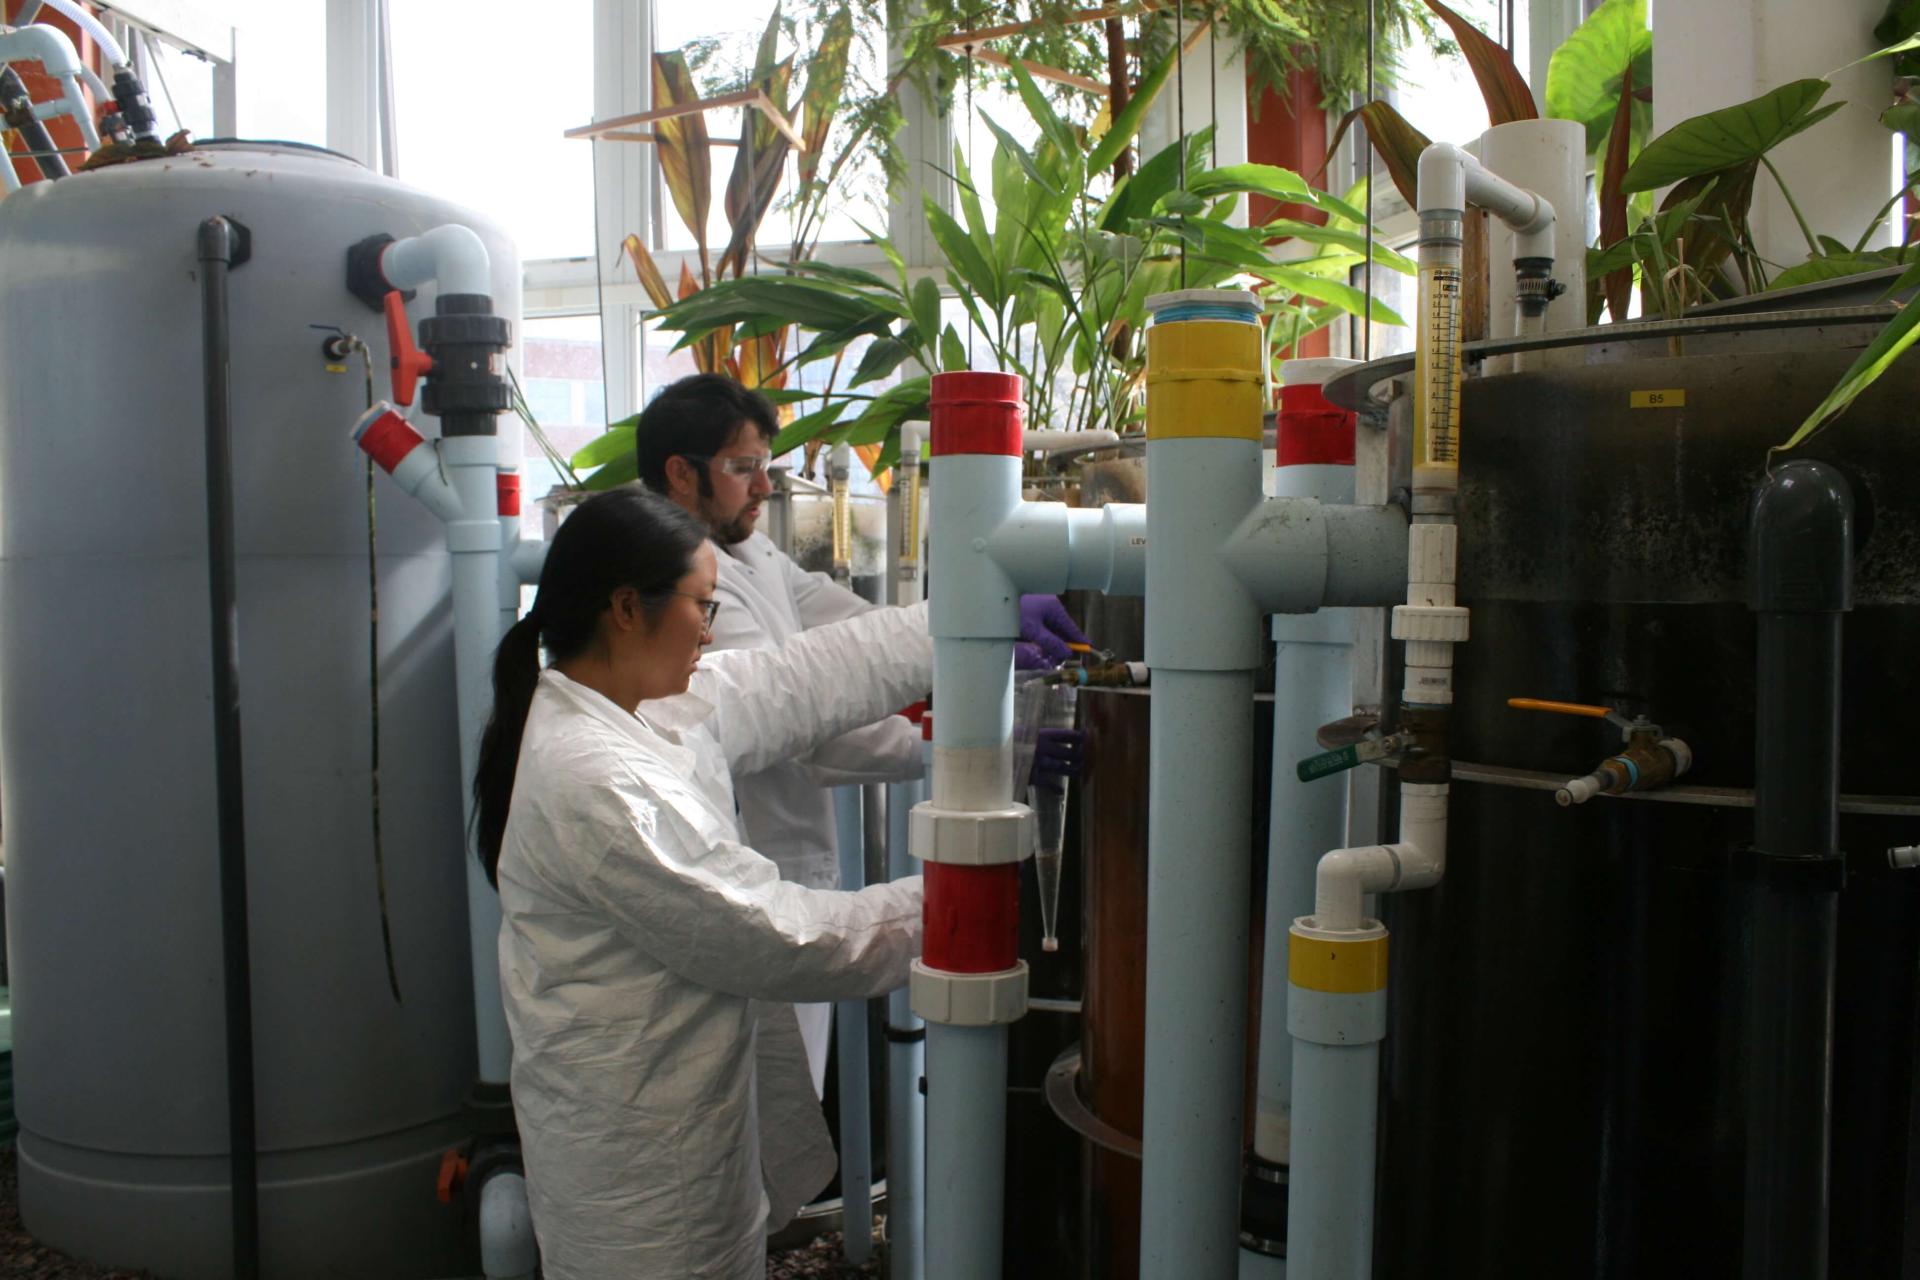 Two students performing Lab work next to large tanks of water with tubing attached.